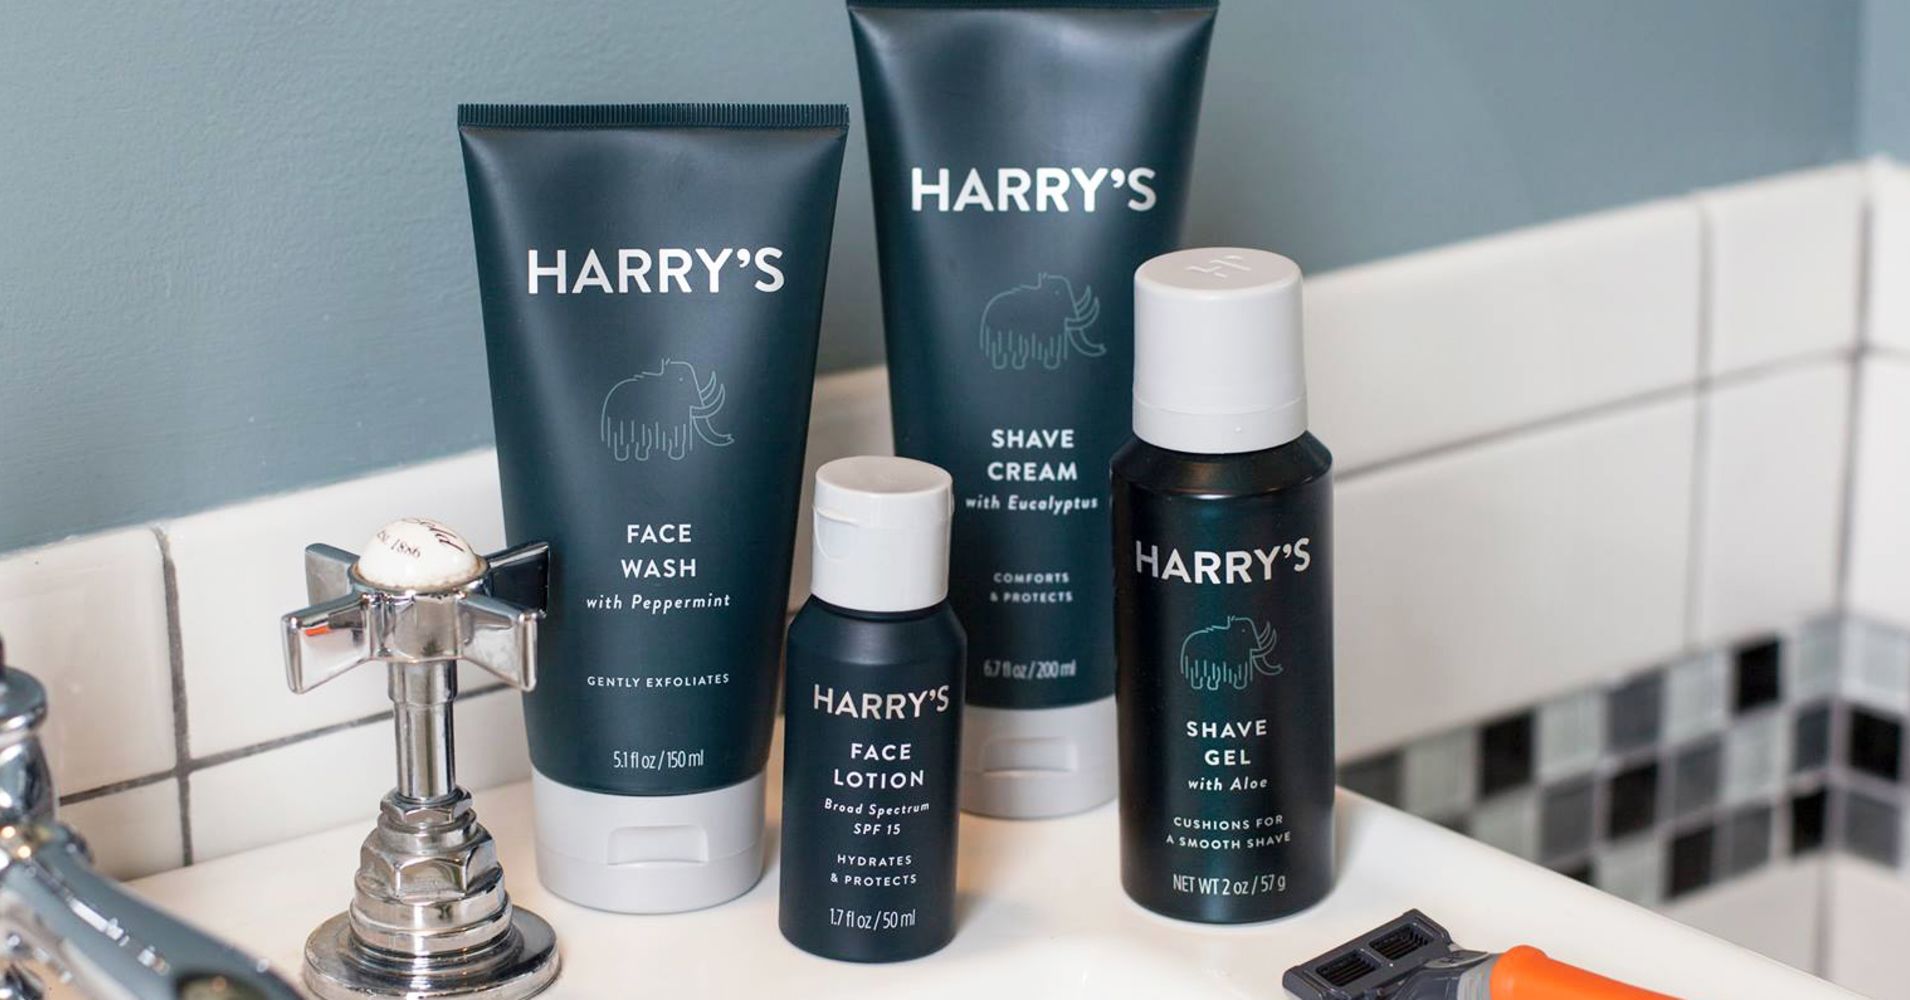 Don't compare Harry's to Unilever's Dollar Shave Club deal: Edgewell CEO